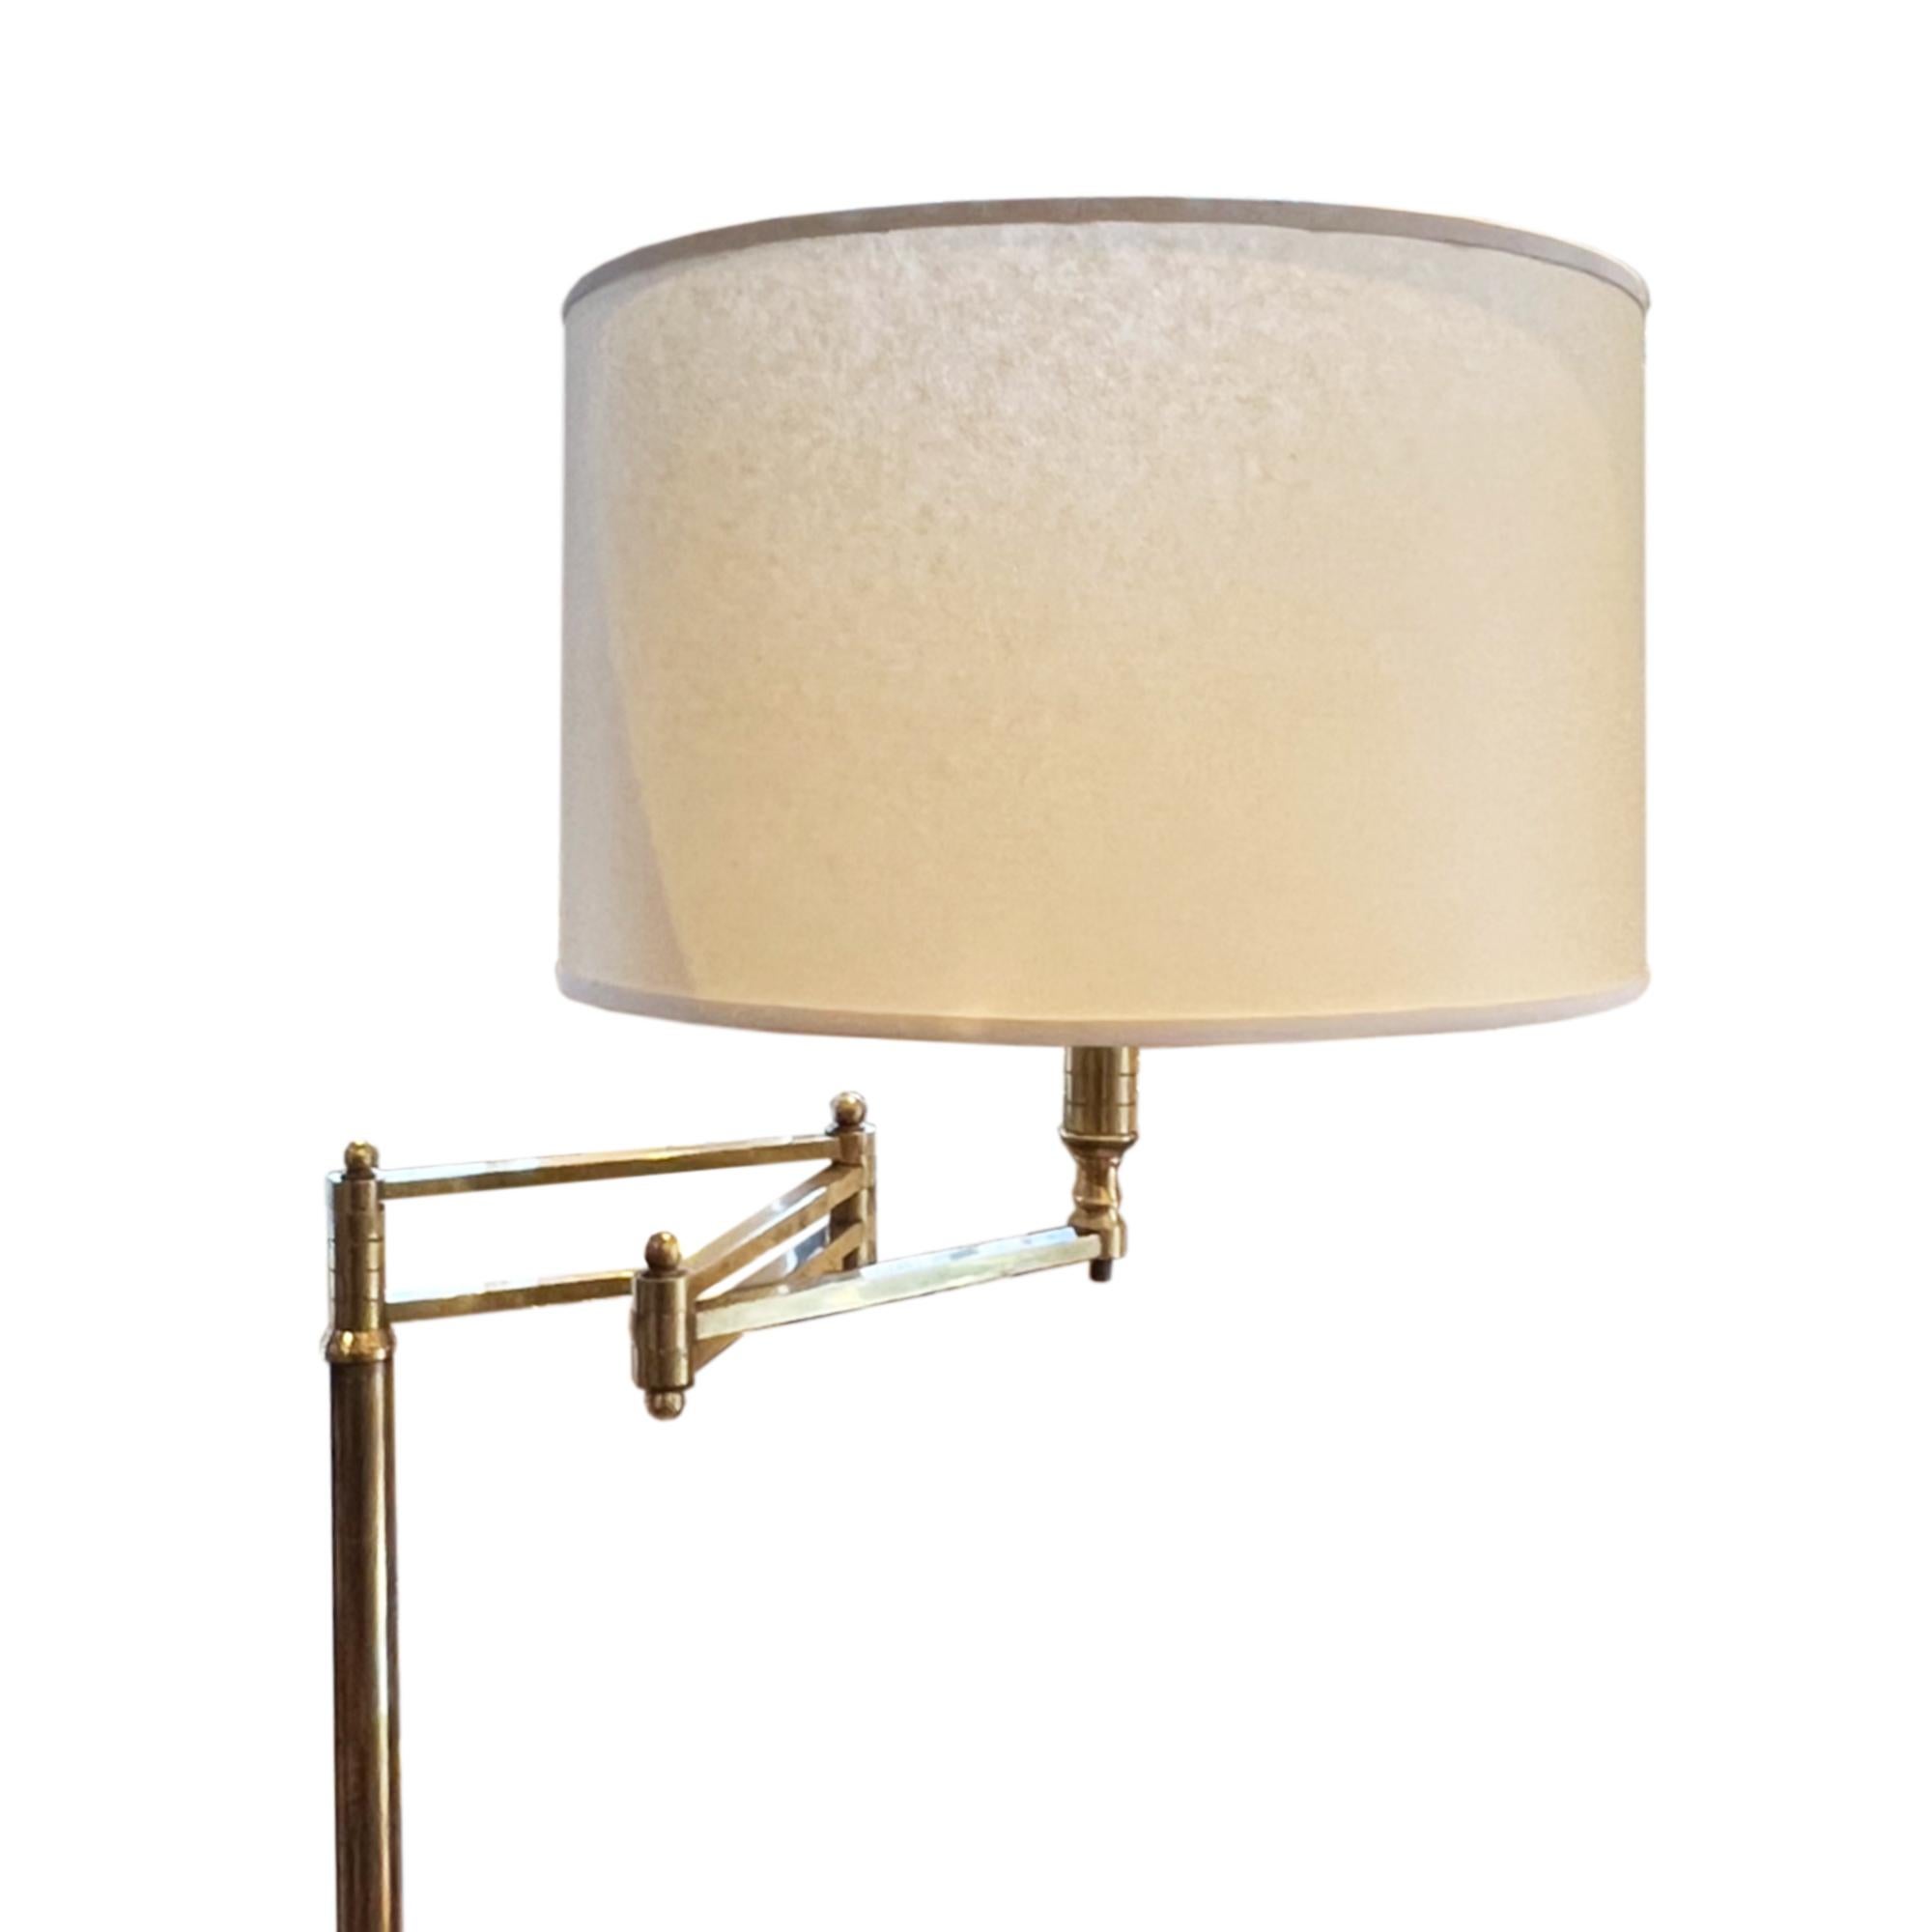 This floor lamp was made in France in the 1960s and is fully adjustable, please take a look at all our pictures.

A simple design, this light is made from brass with a solid white marble base. This ensures it remains sturdy, even with the arm fully